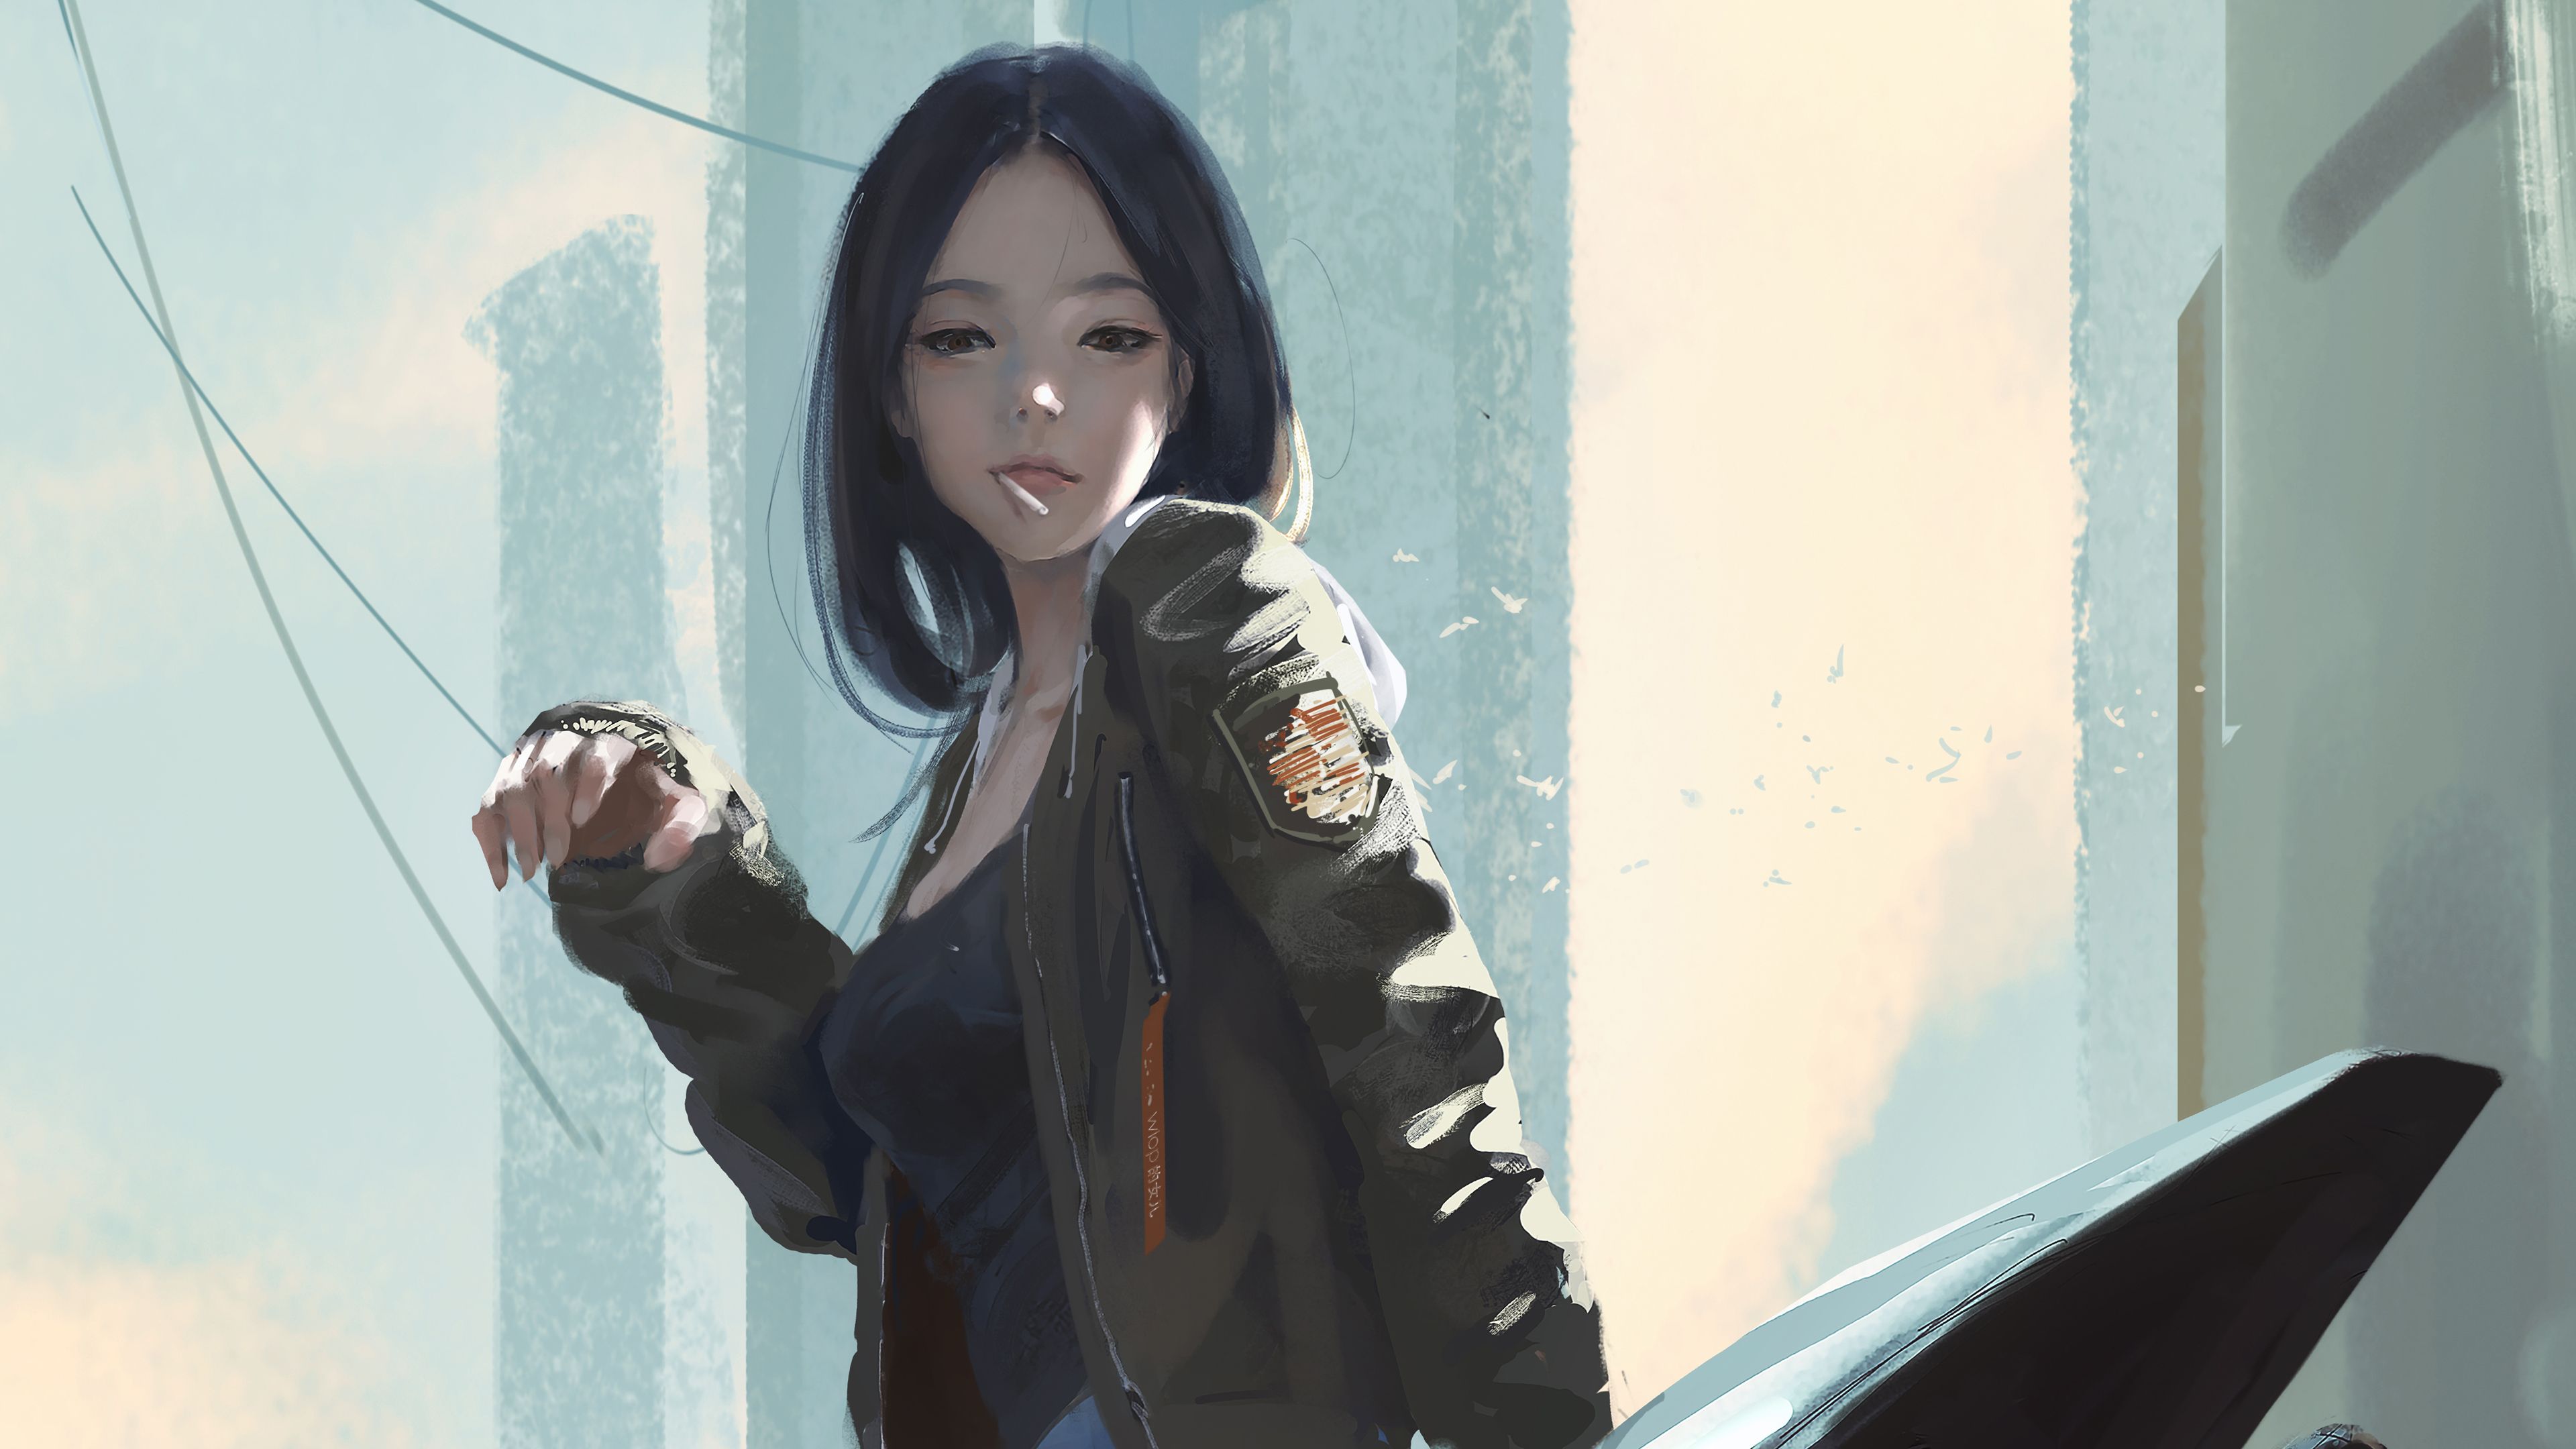 Urban Girl Smoking Cigarette, HD Anime, 4k Wallpaper, Image, Background, Photo and Picture